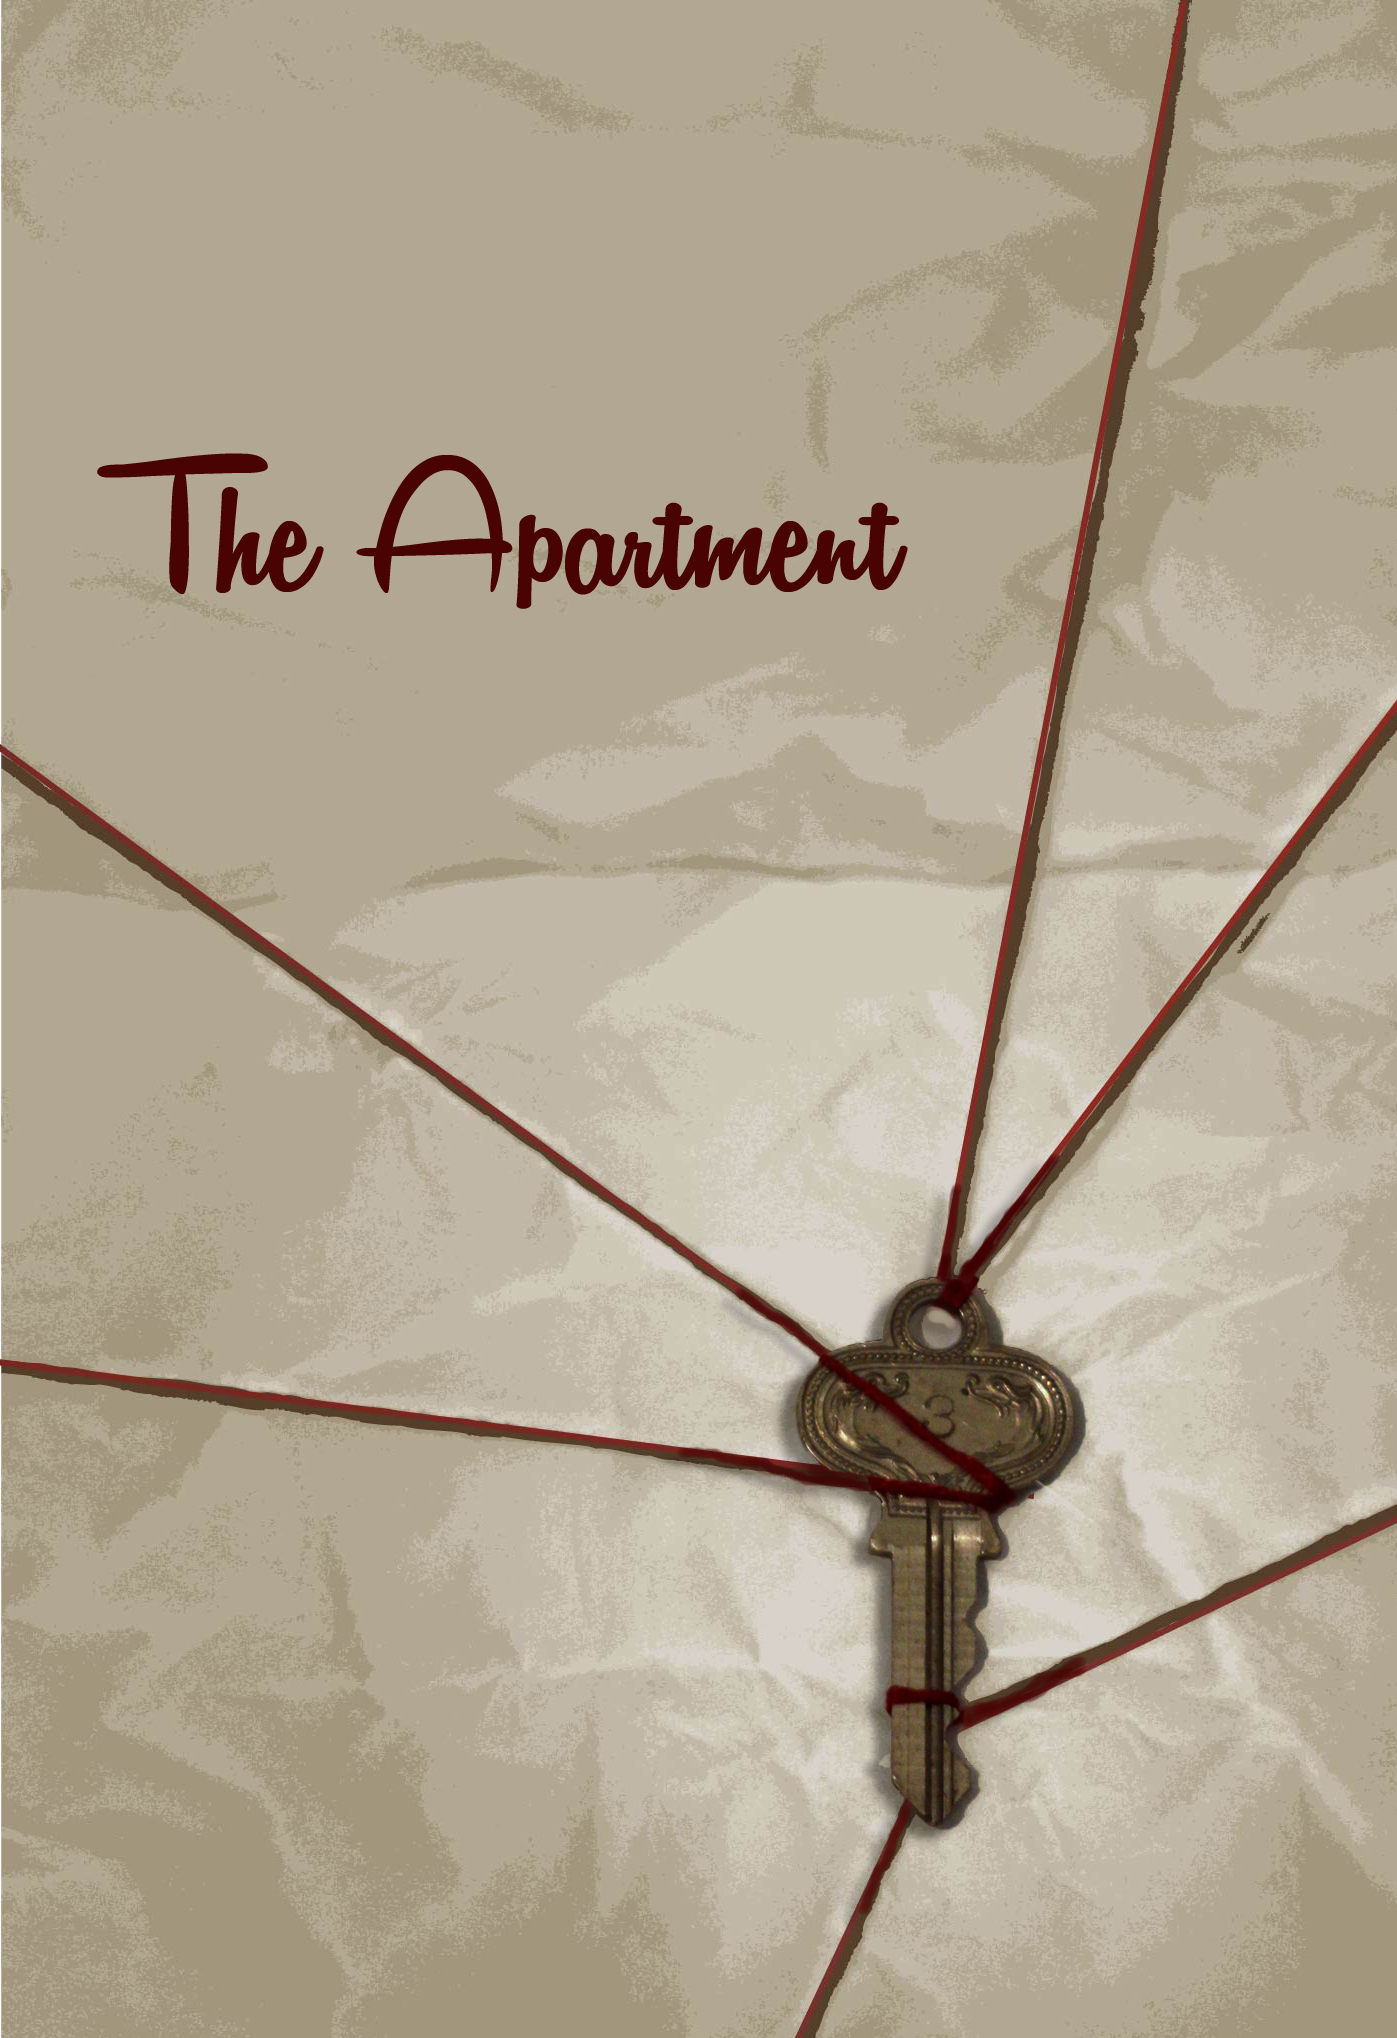  Program cover for the movie  The Apartment  